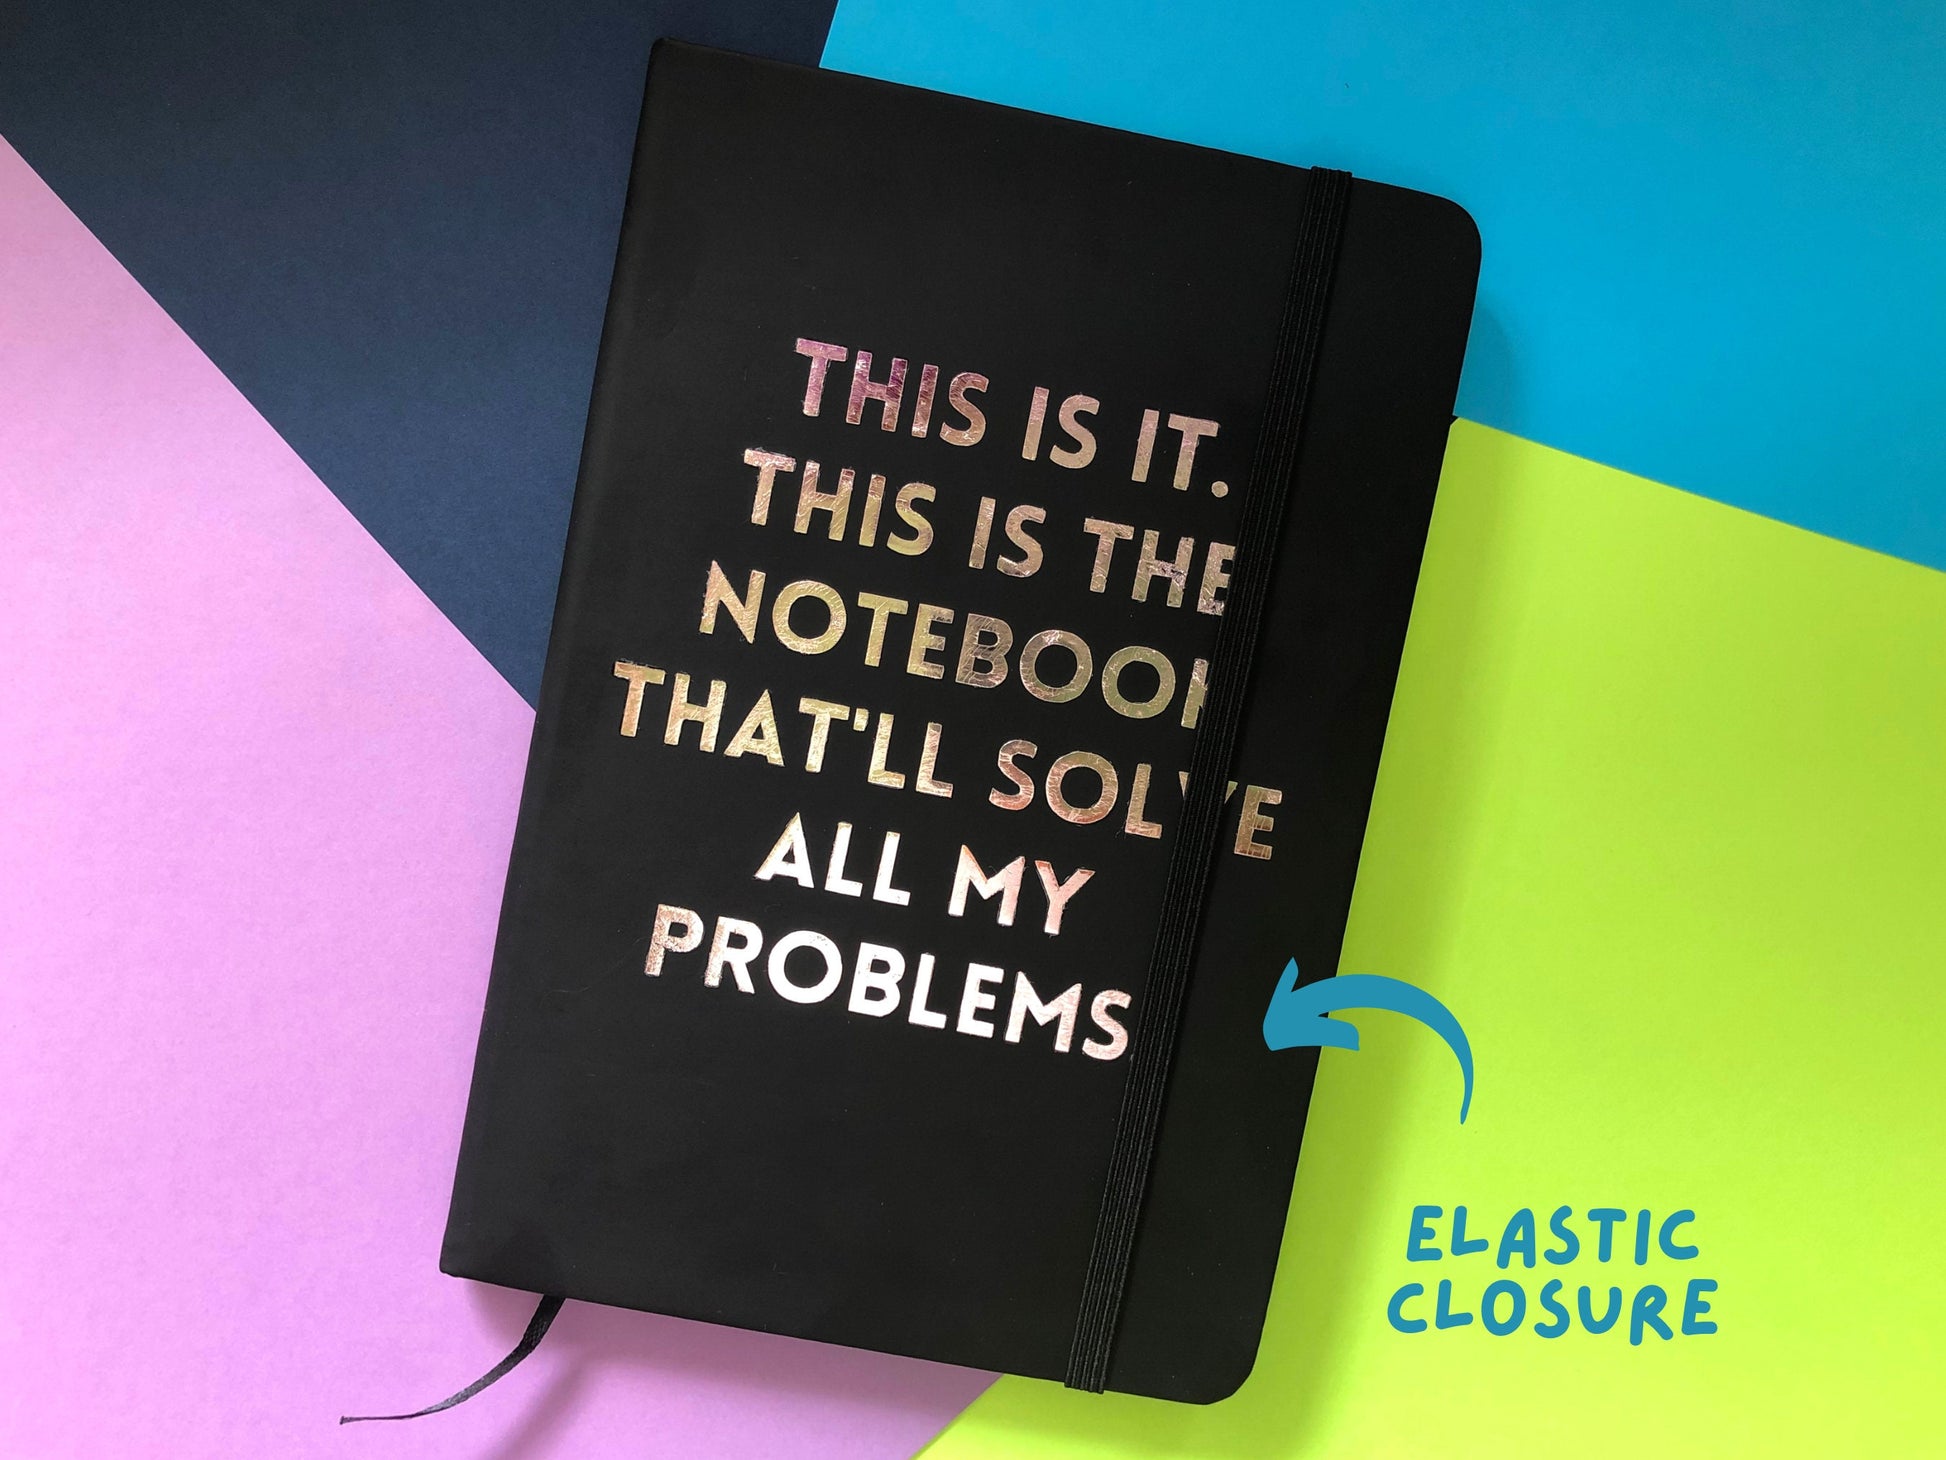 This Is The Notebook That'll Solve My Problems | Funny Notebooks | Fun Journals